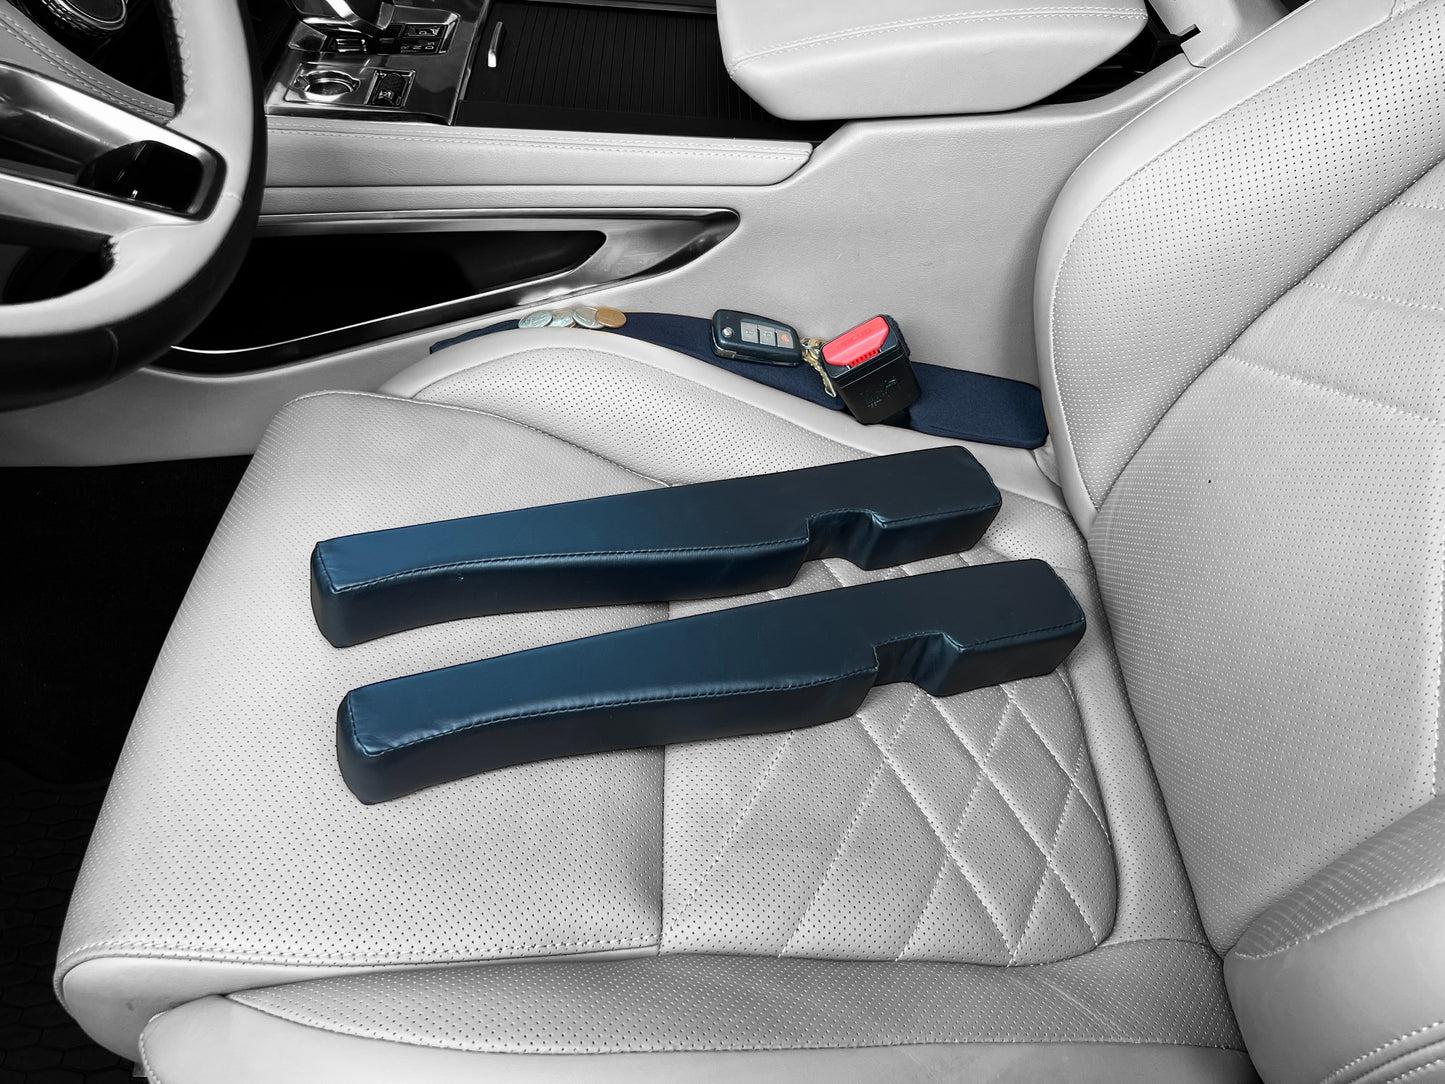 GAP GUARD - Car Seat Gap Filler - Fill The Gap Between The Seat and Ce –  One More Thing LLC